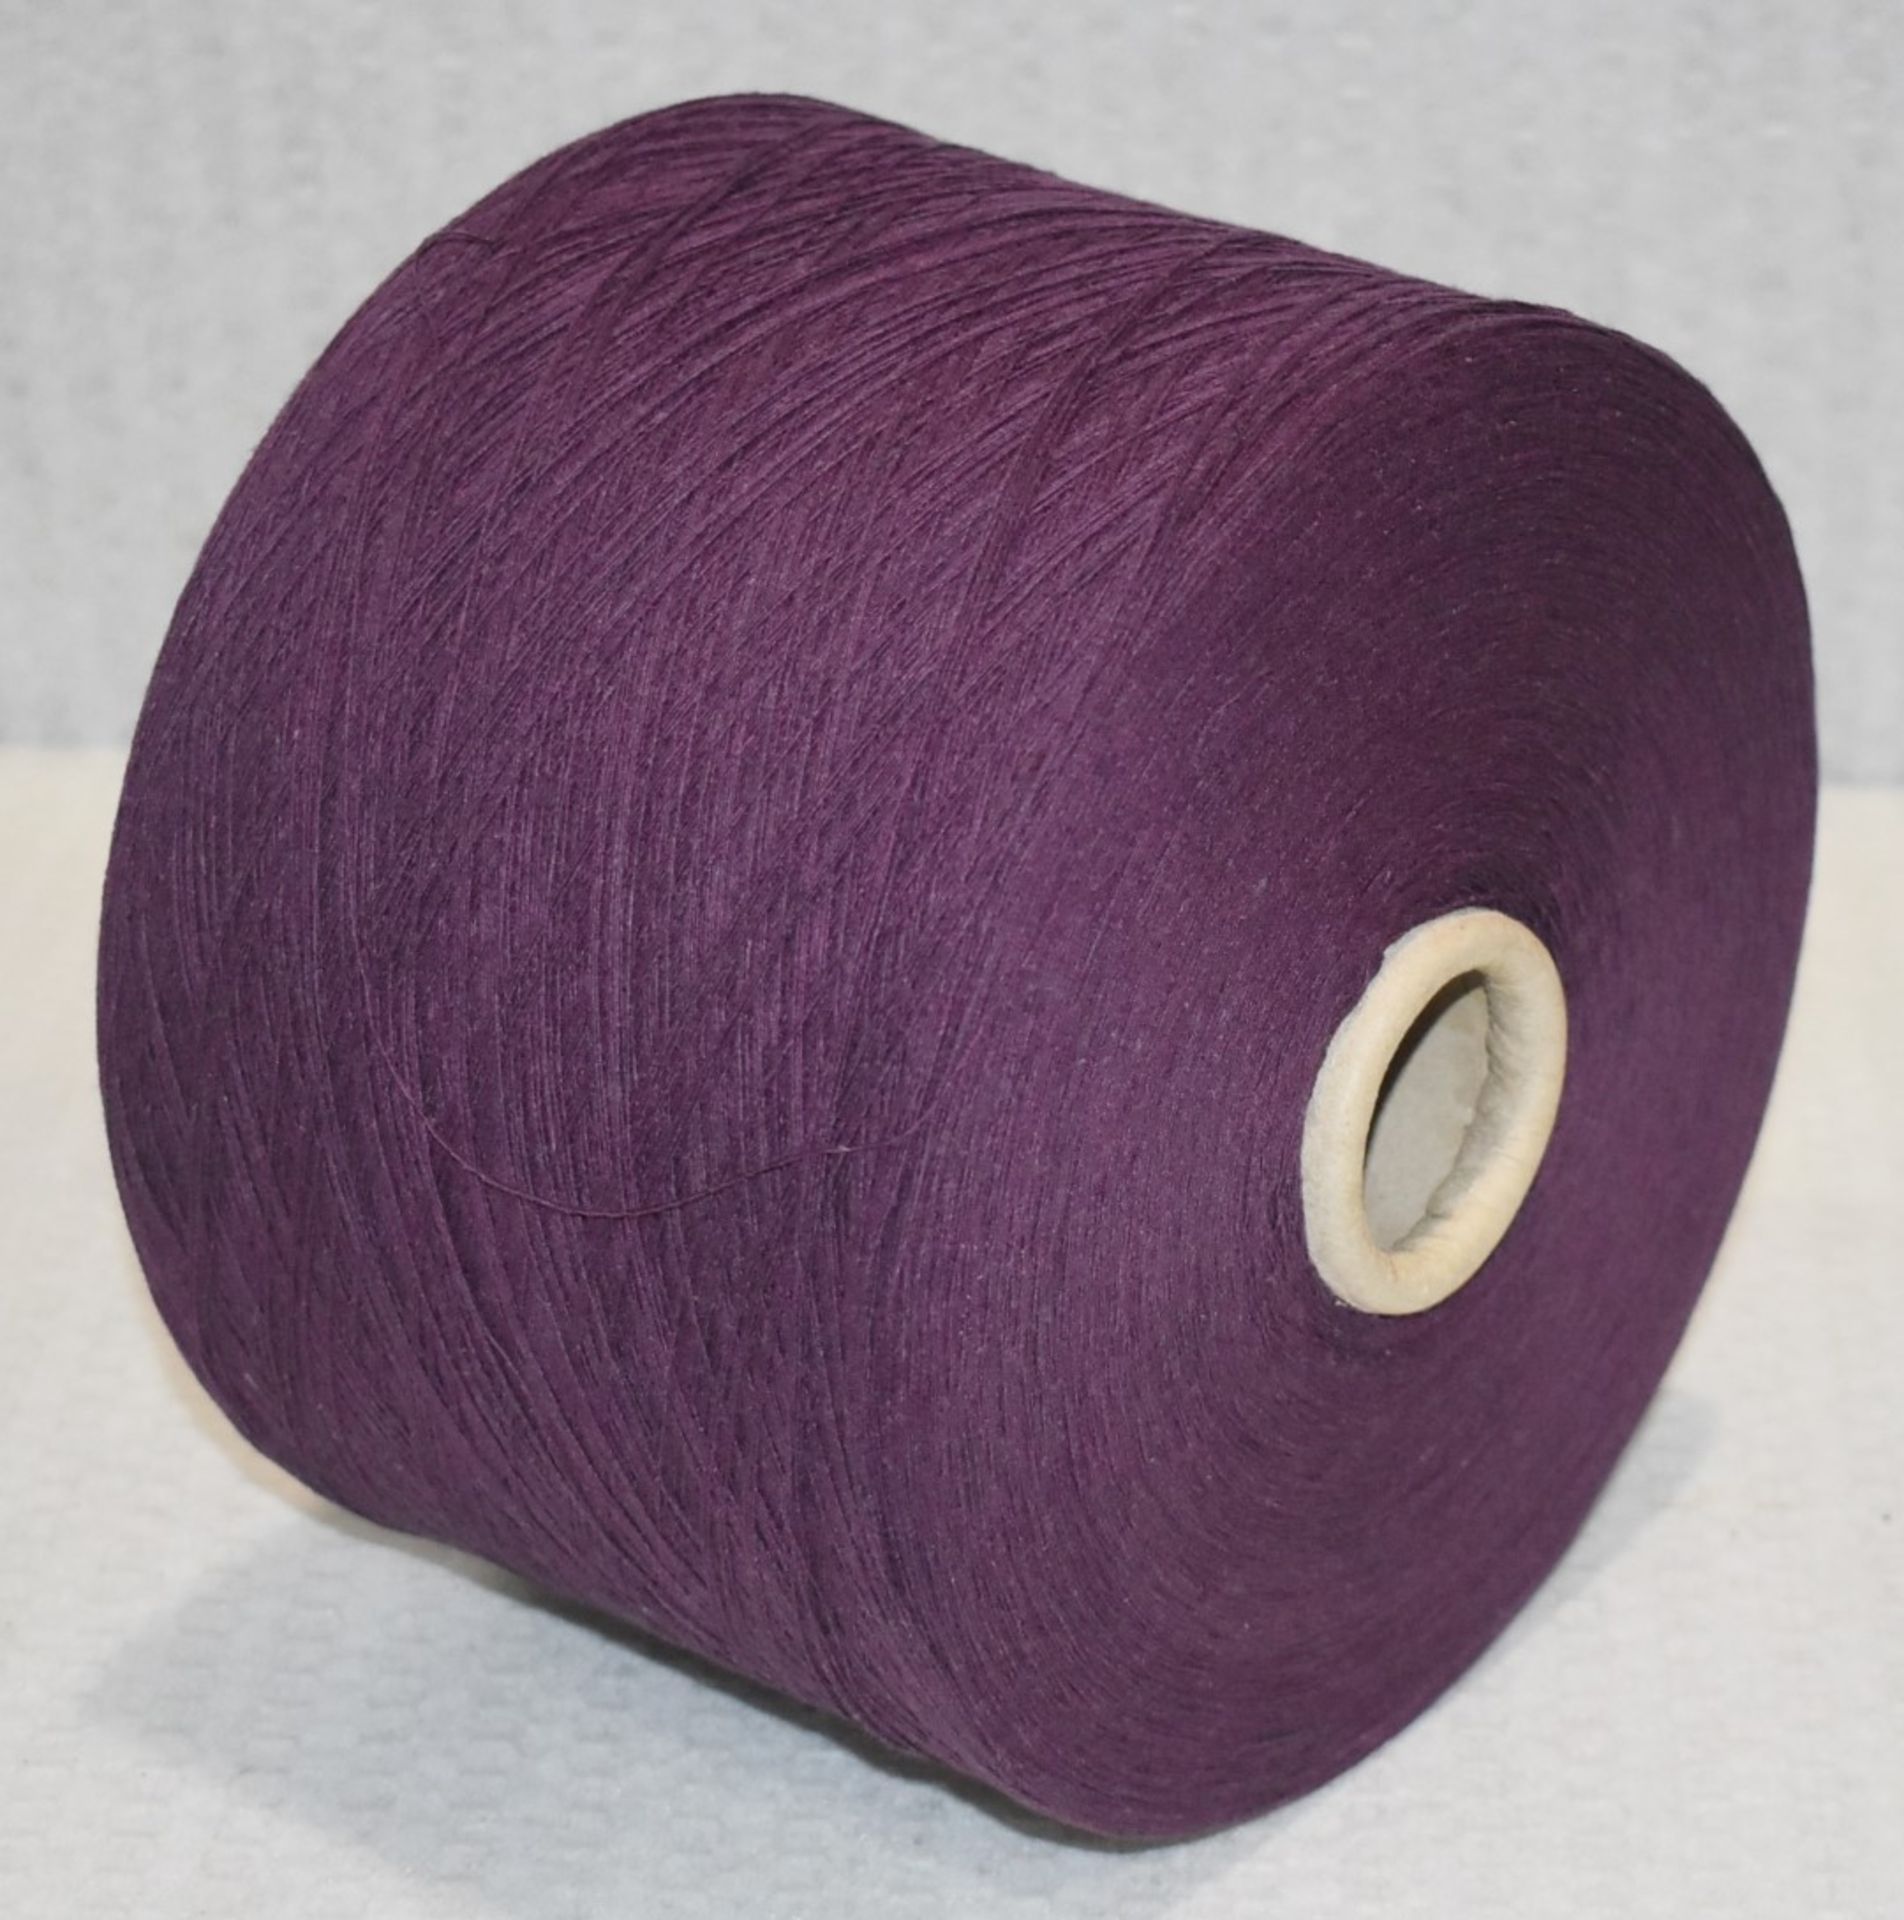 12 x Cones of 1/13 MicroCotton Knitting Yarn - Purple - Approx Weight: 2,300g - New Stock ABL Yarn - Image 9 of 15